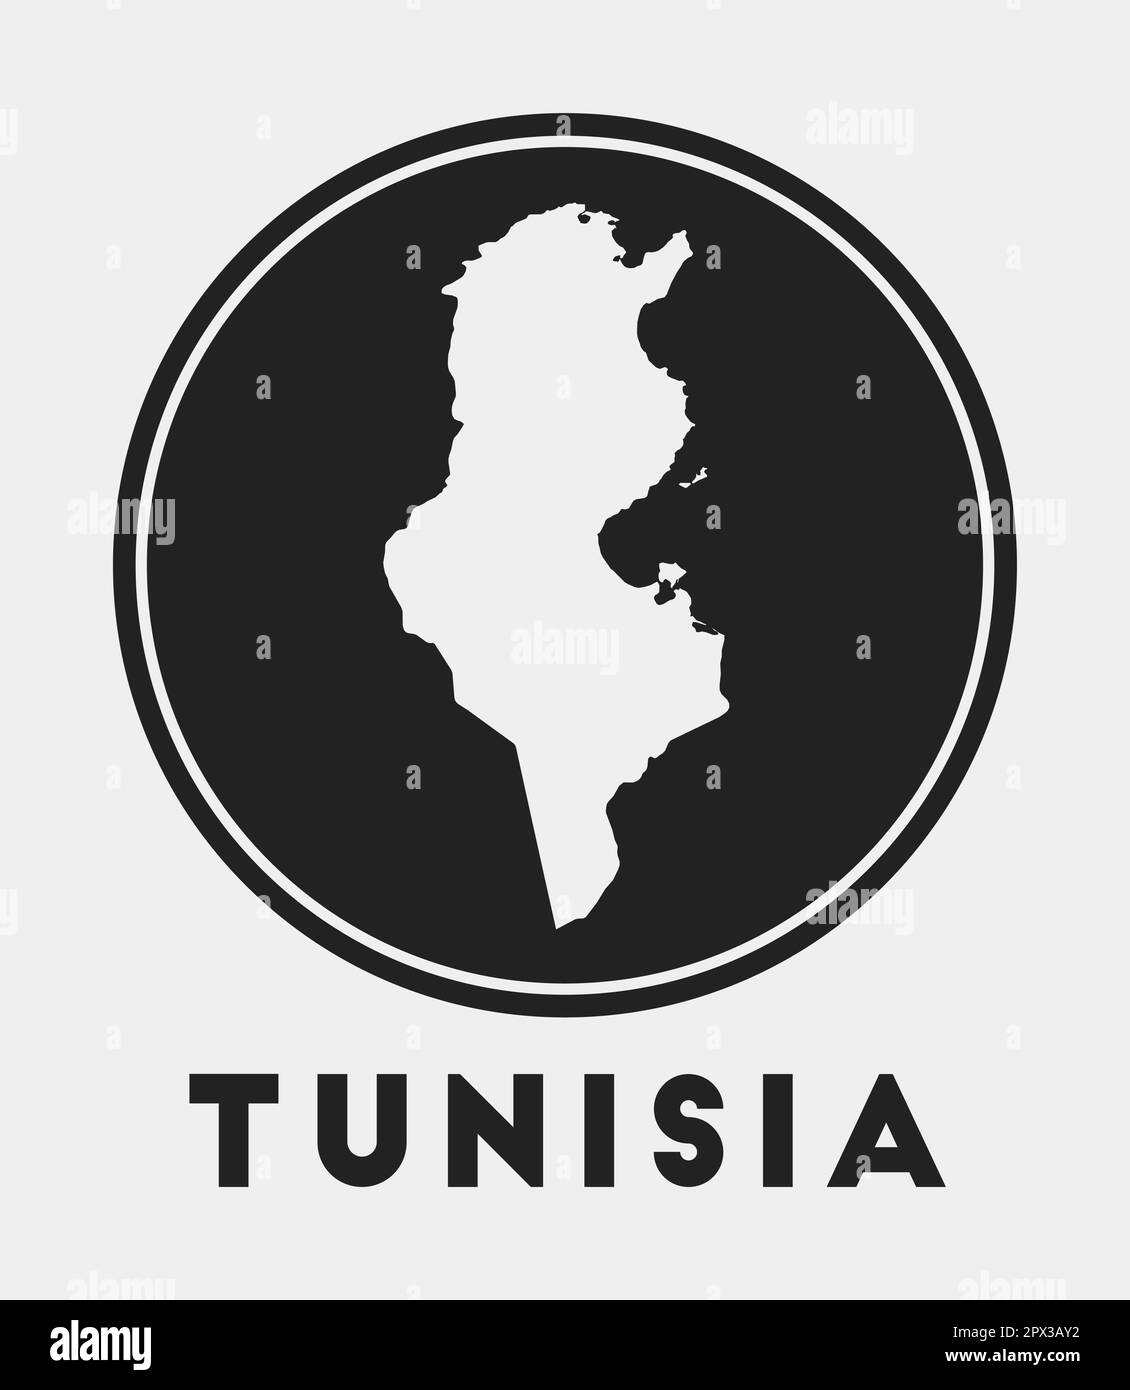 Tunisia icon. Round logo with country map and title. Stylish Tunisia ...